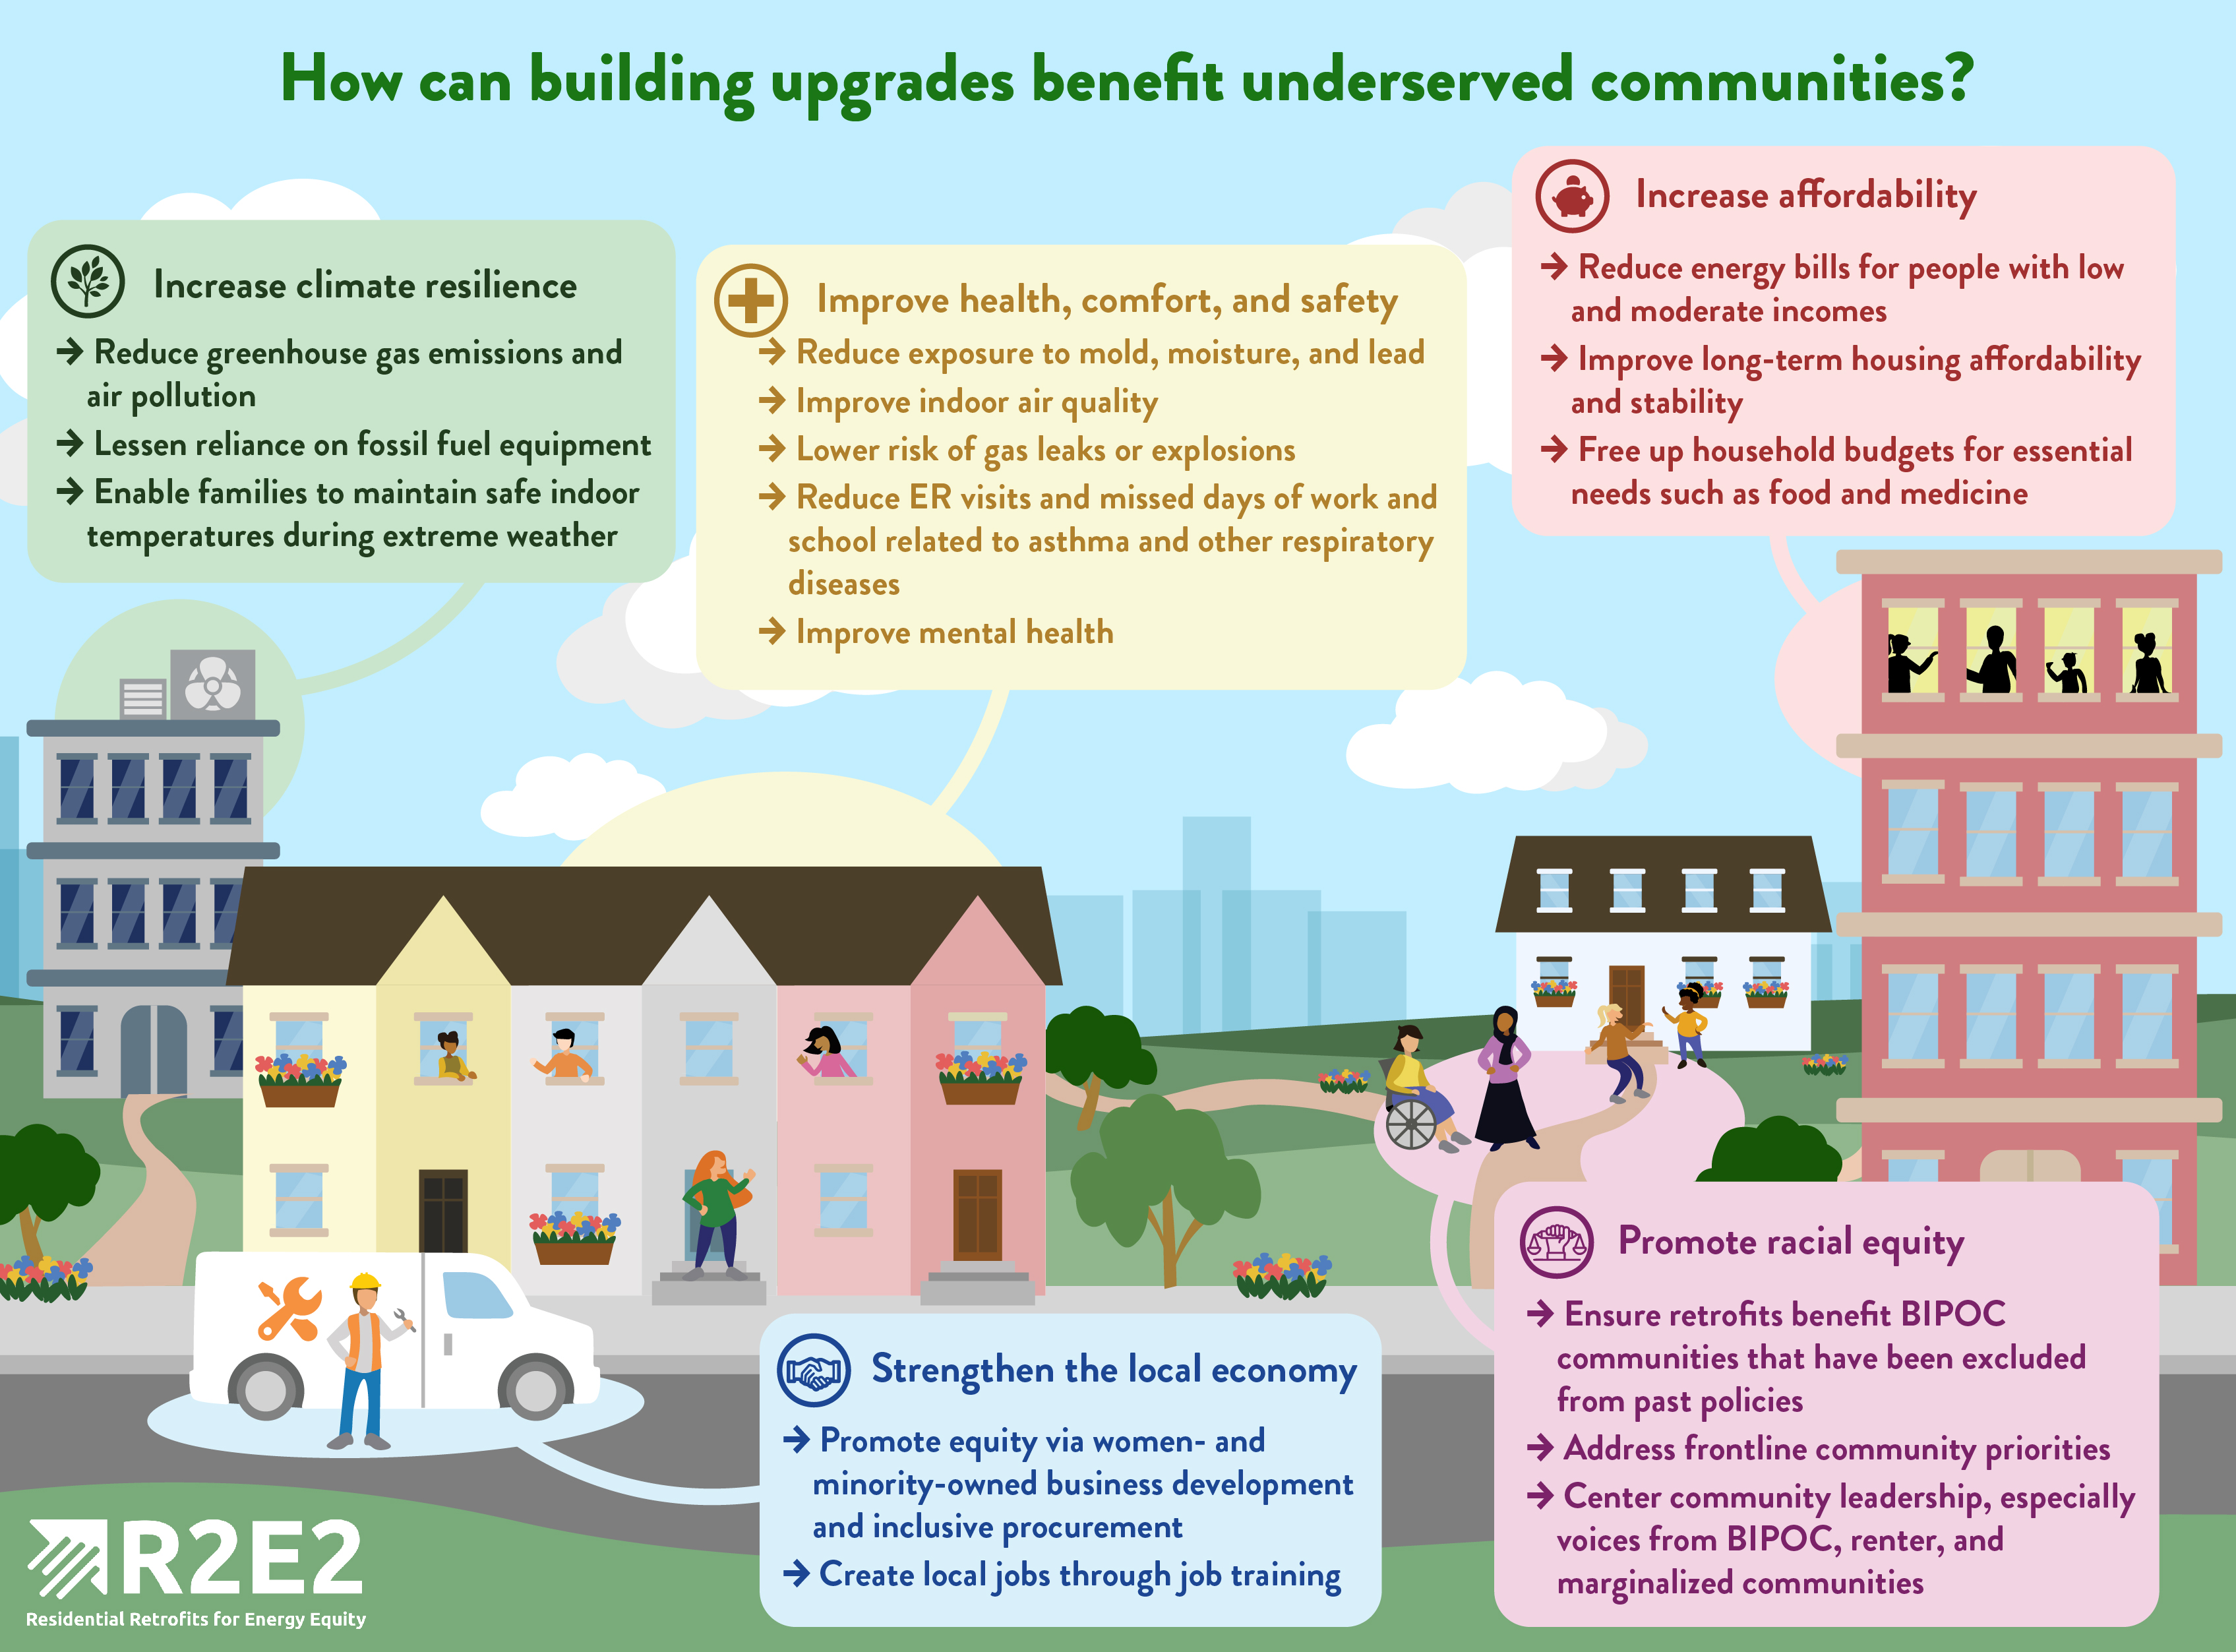 An infographic featuring a stylized cityscape and the heading: "How can building upgrades benefit underserved communities?" Underneath, there are the following categories: increase climate resilience, strengthen the local economy, improve health, comfort, and safety, increase affordability, and increase racial equity